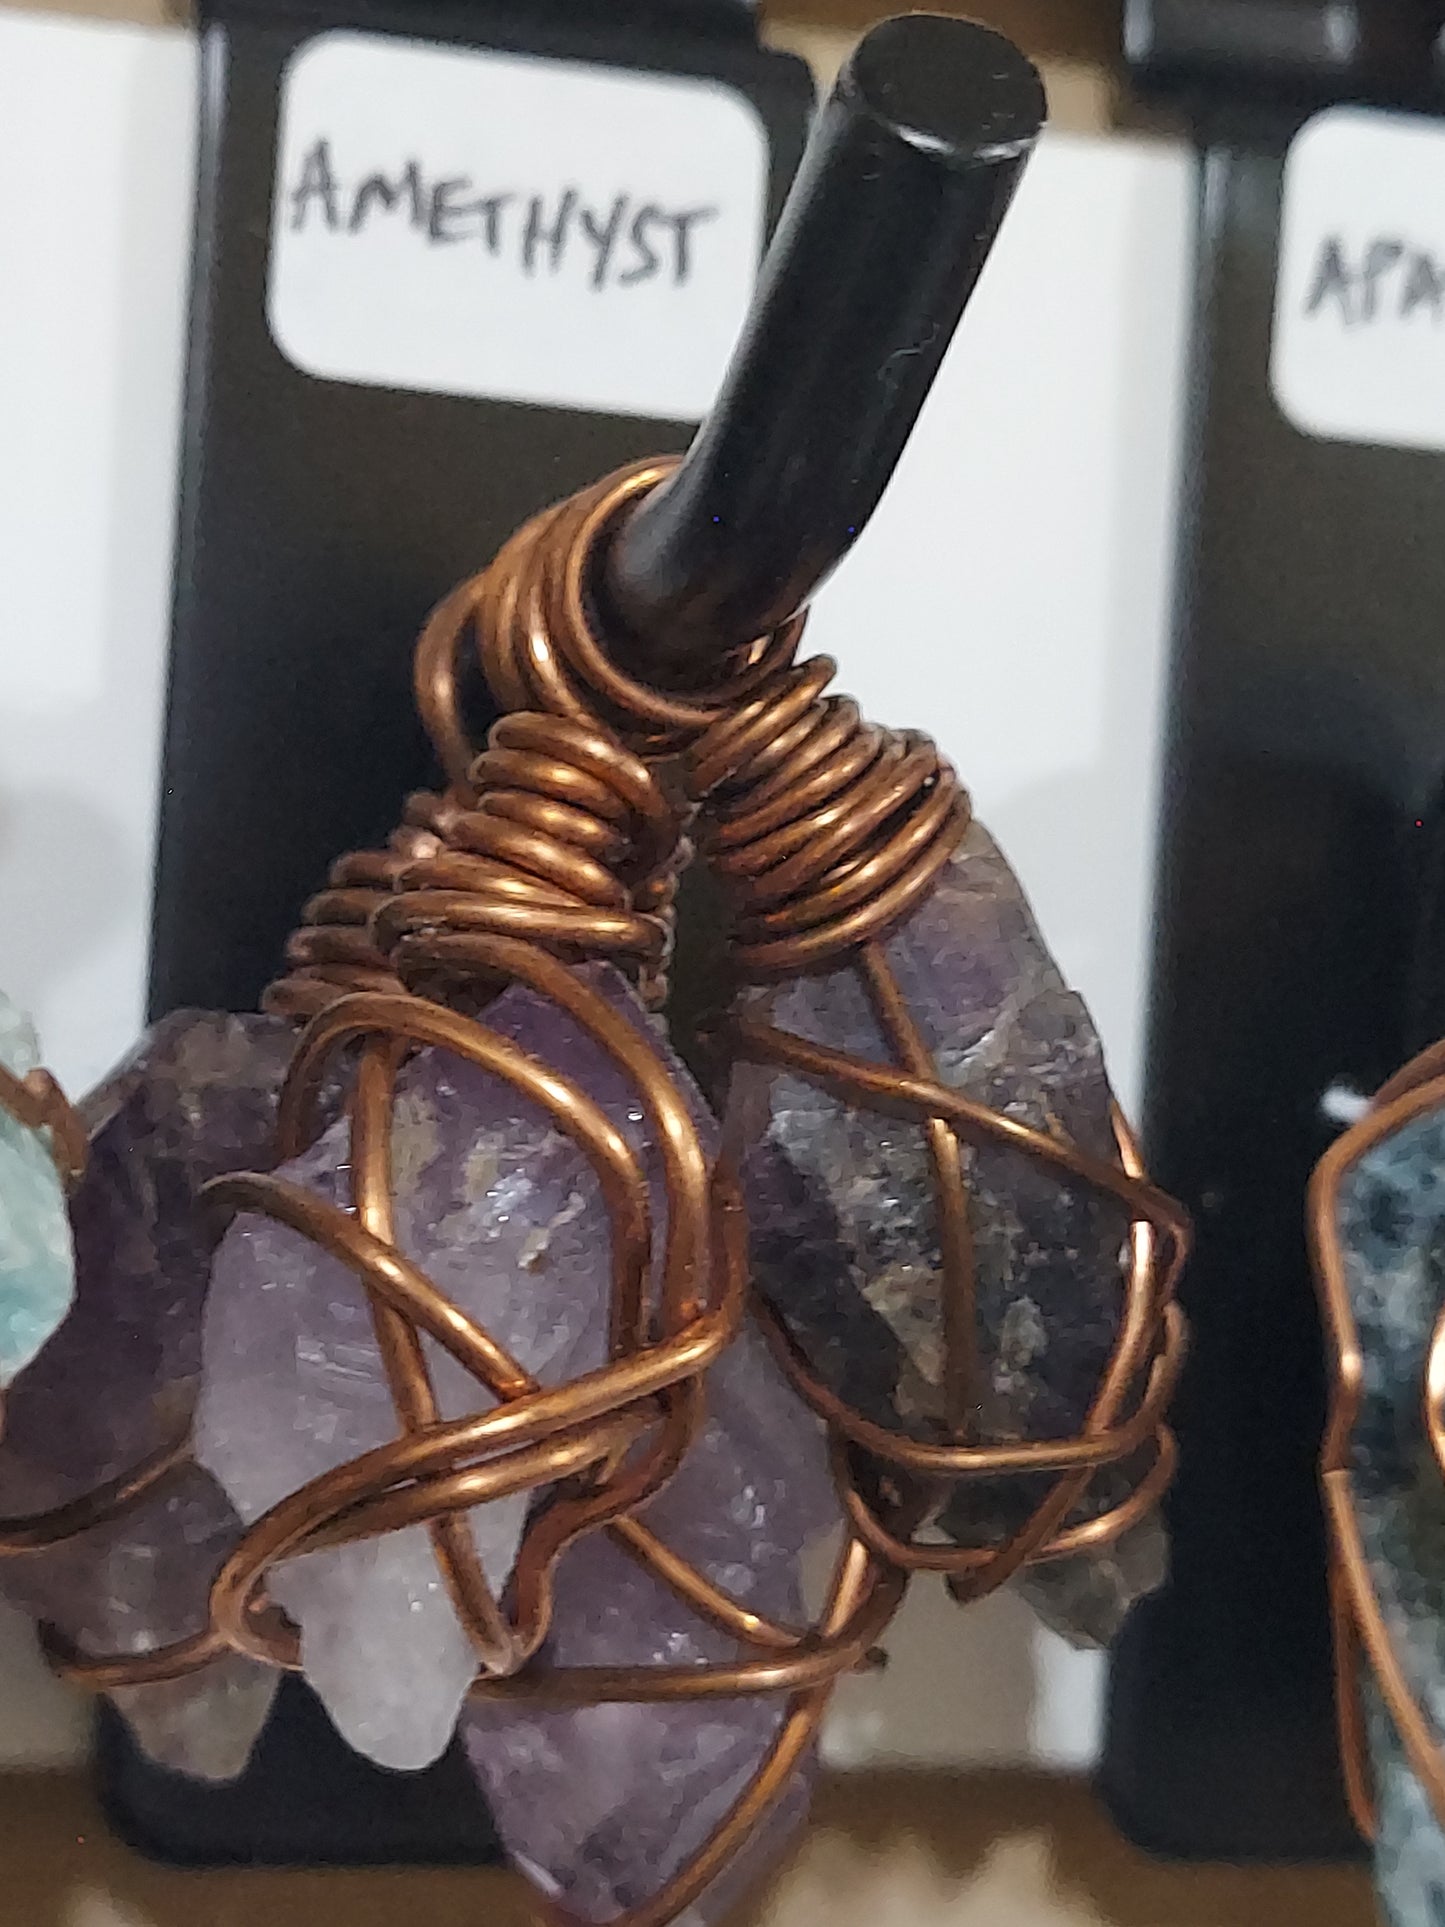 Raw Amethyst Pendant on Necklace Rope